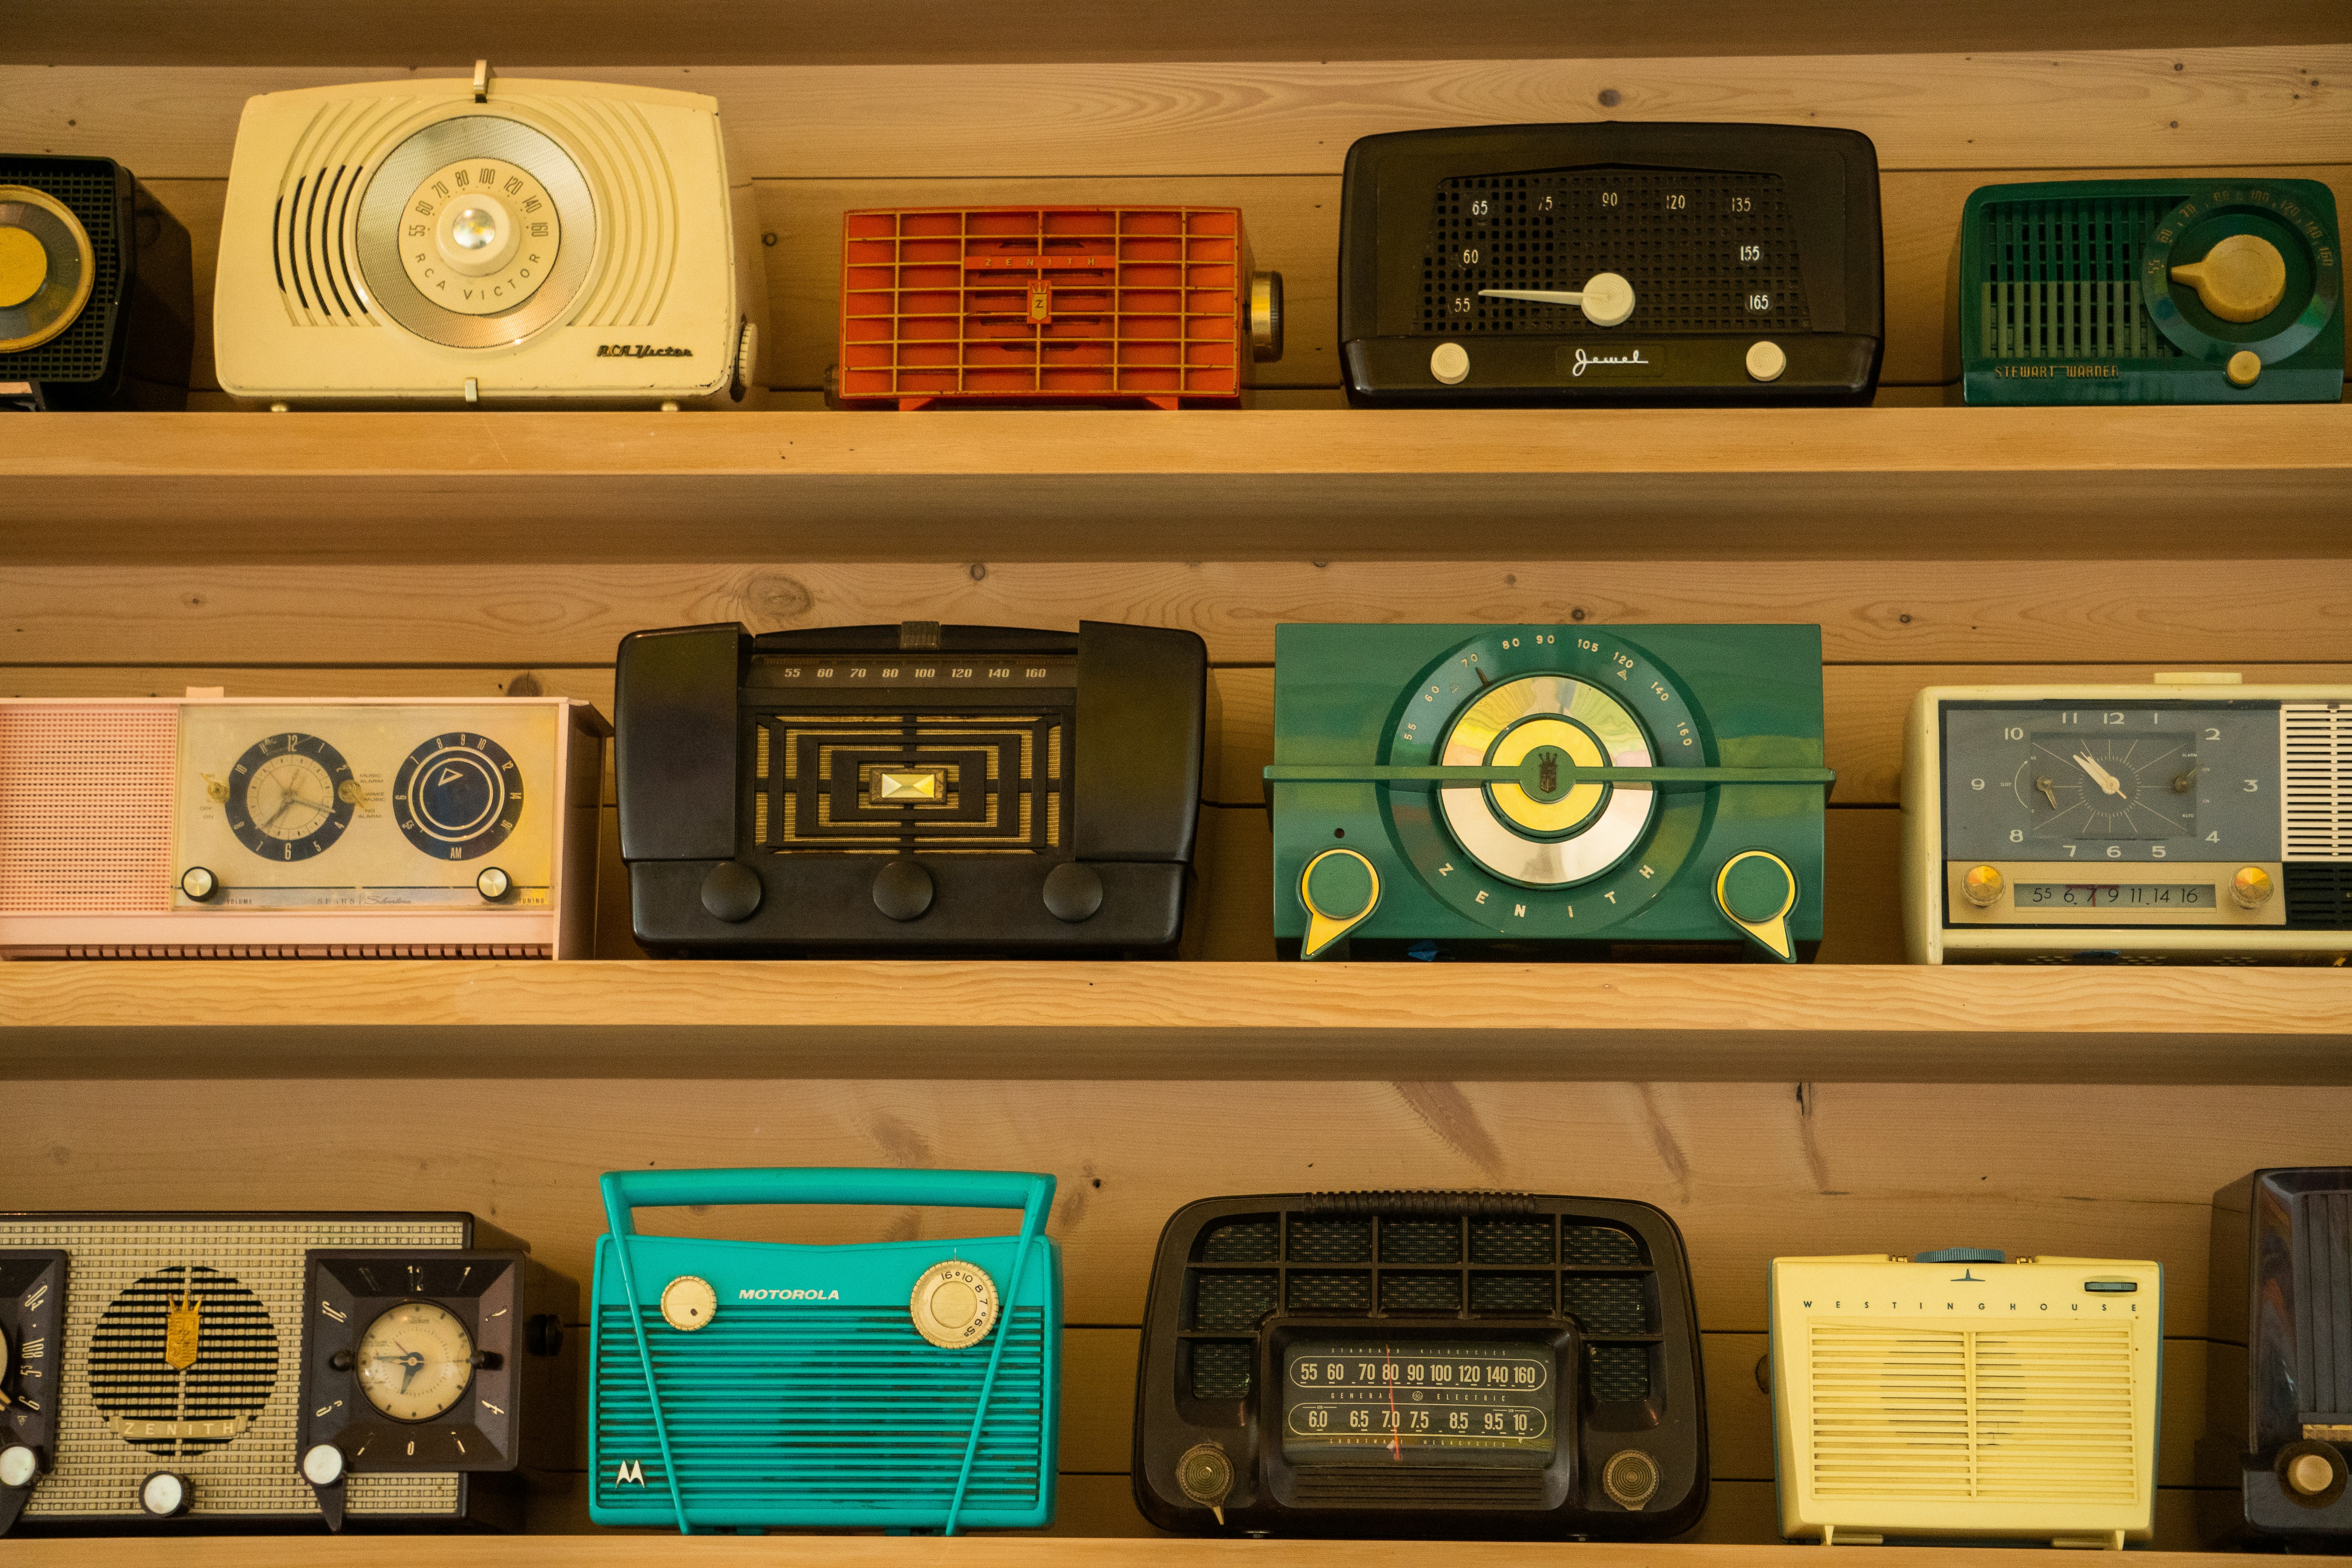 Why should I consider antique radio collecting as a hobby?